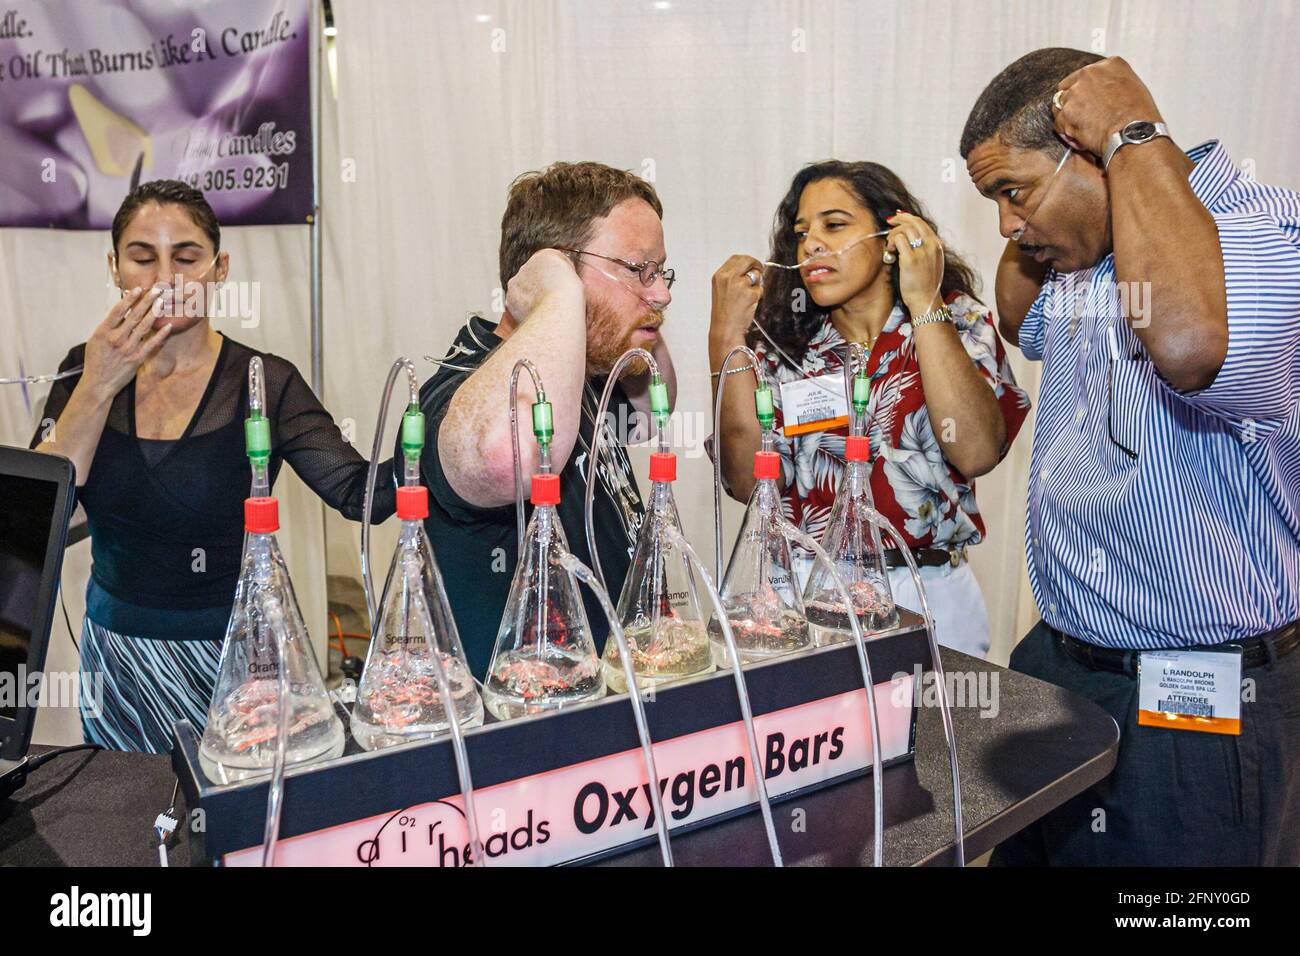 Florida,Miami Beach Convention Center,centre Spa Industry Expo,oxygen aroma therapy bar Black couple man woman female trying, Stock Photo